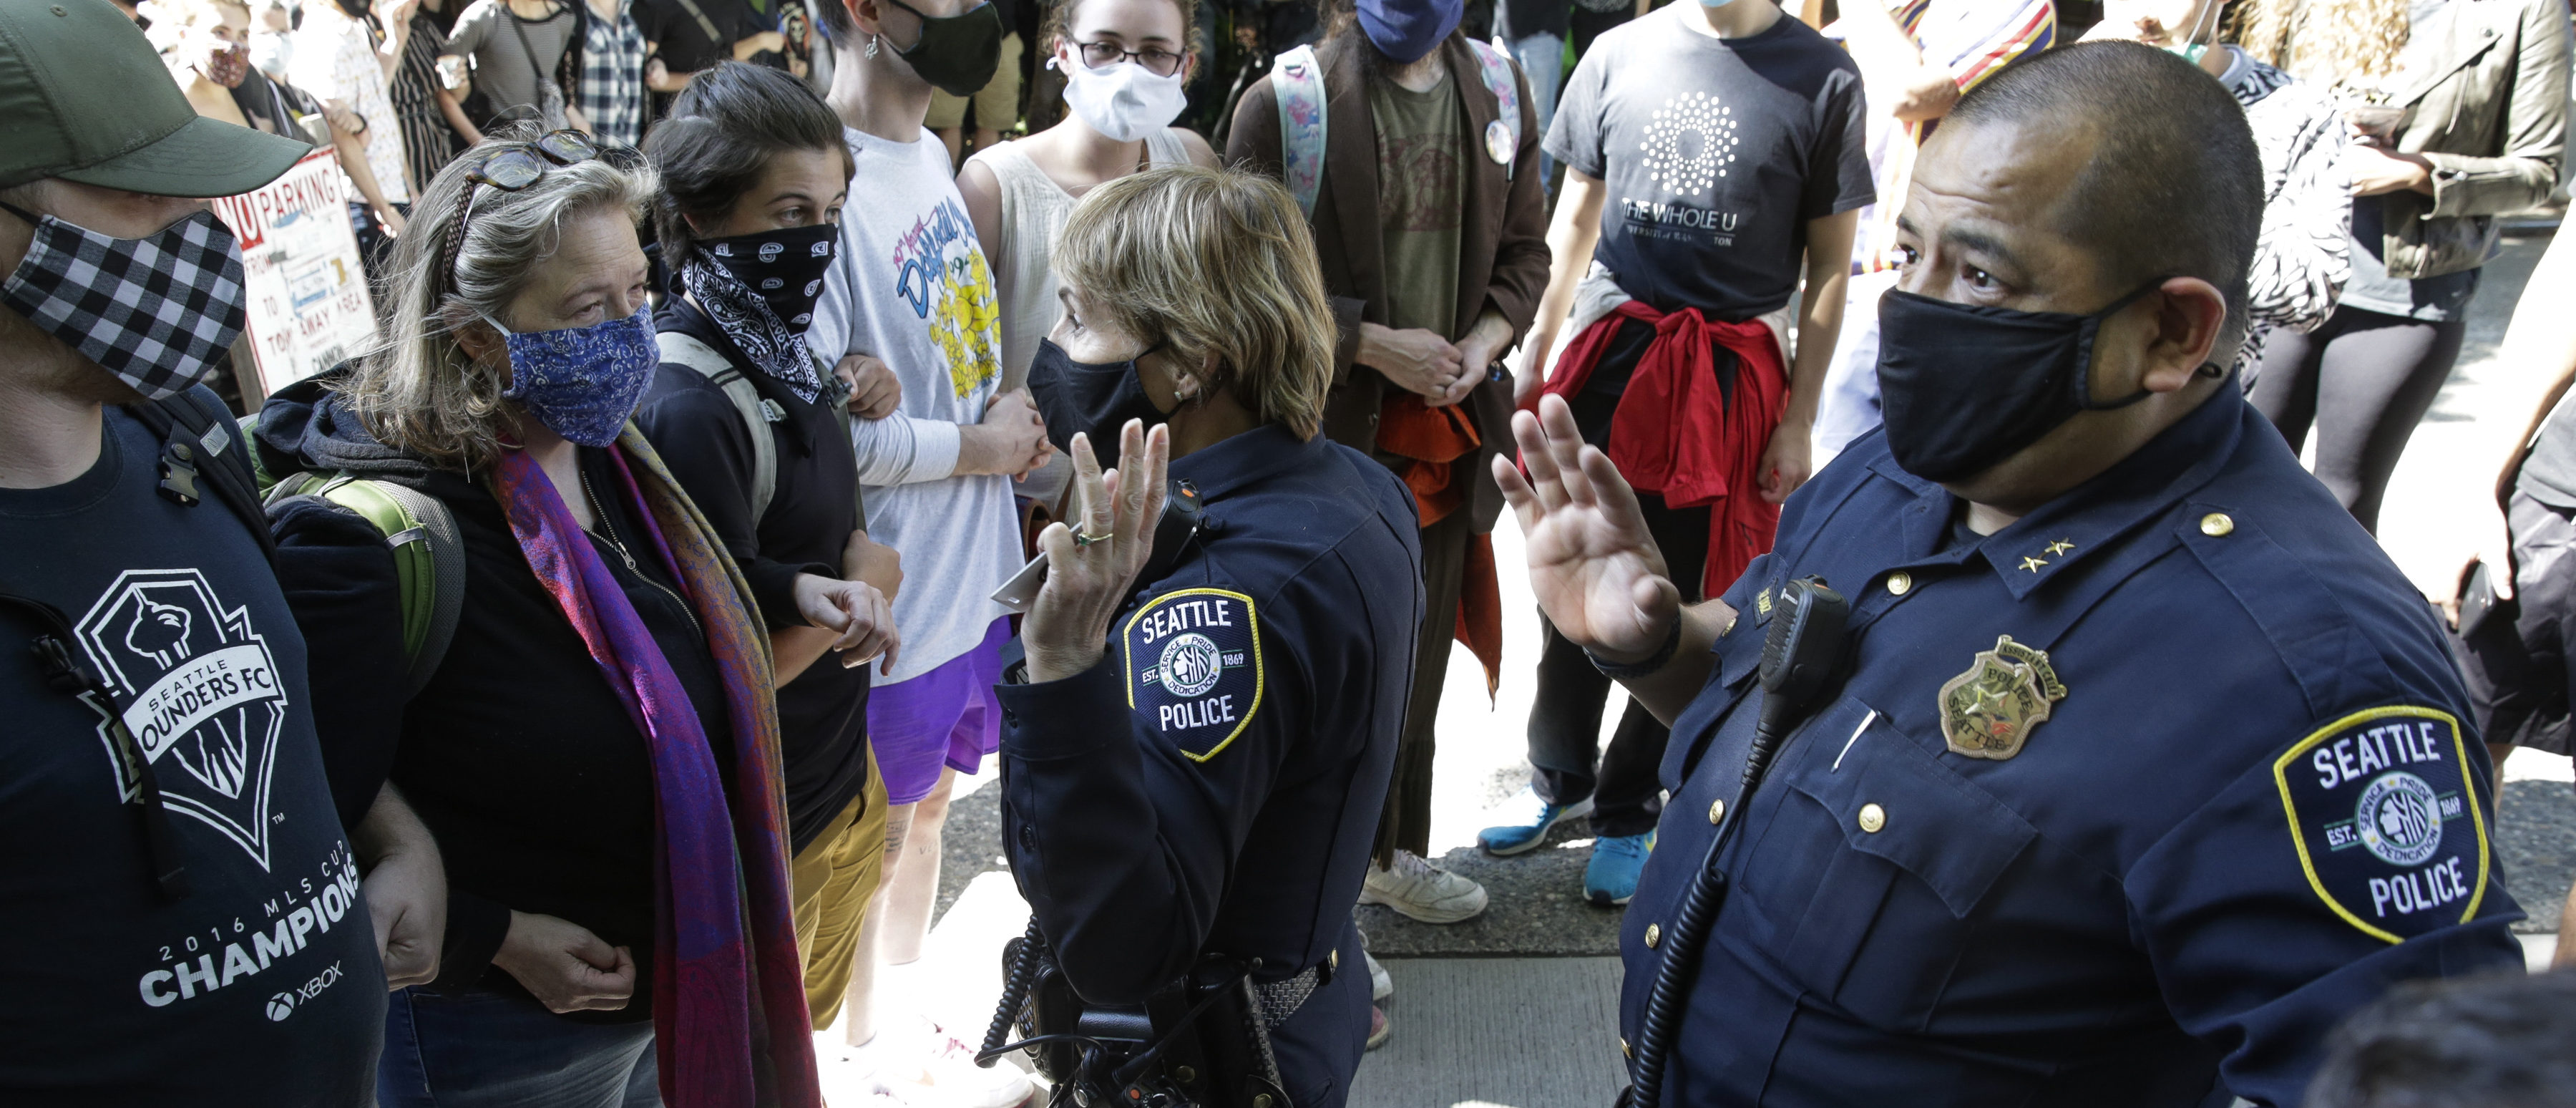 TOPSHOT - Seattle Police Assistant Chief Deanna Nollette and Assistant Chief Adrian Diaz are blocked by protesters from entering the newly created Capitol Hill Autonomous Zone (CHAZ) in Seattle, Washington on June 11, 2020. - Two police officers attempt to enter the area, but are blocked by people standing close together and holding cameras as they film. The area surrounding the East Precinct building has come to be known as the CHAZ, Capitol Hill Autonomous Zone. (JASON REDMOND/AFP via Getty Images)